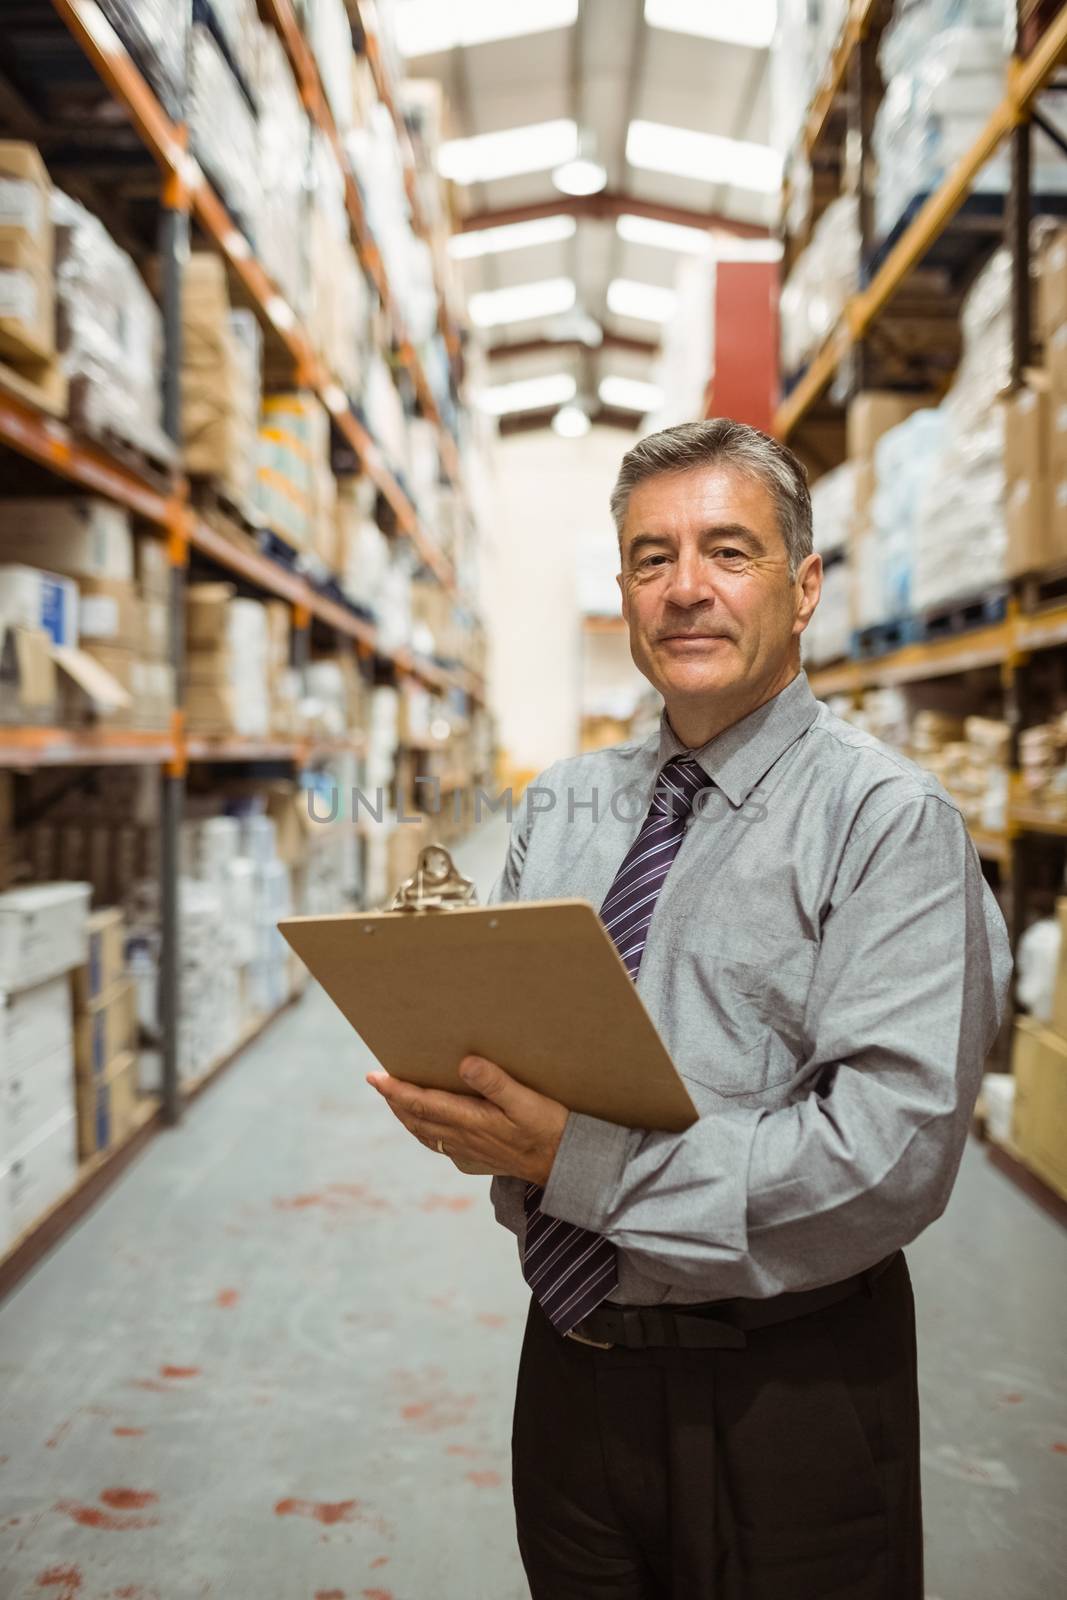 Smiling warehouse manager holding a clipboard by Wavebreakmedia